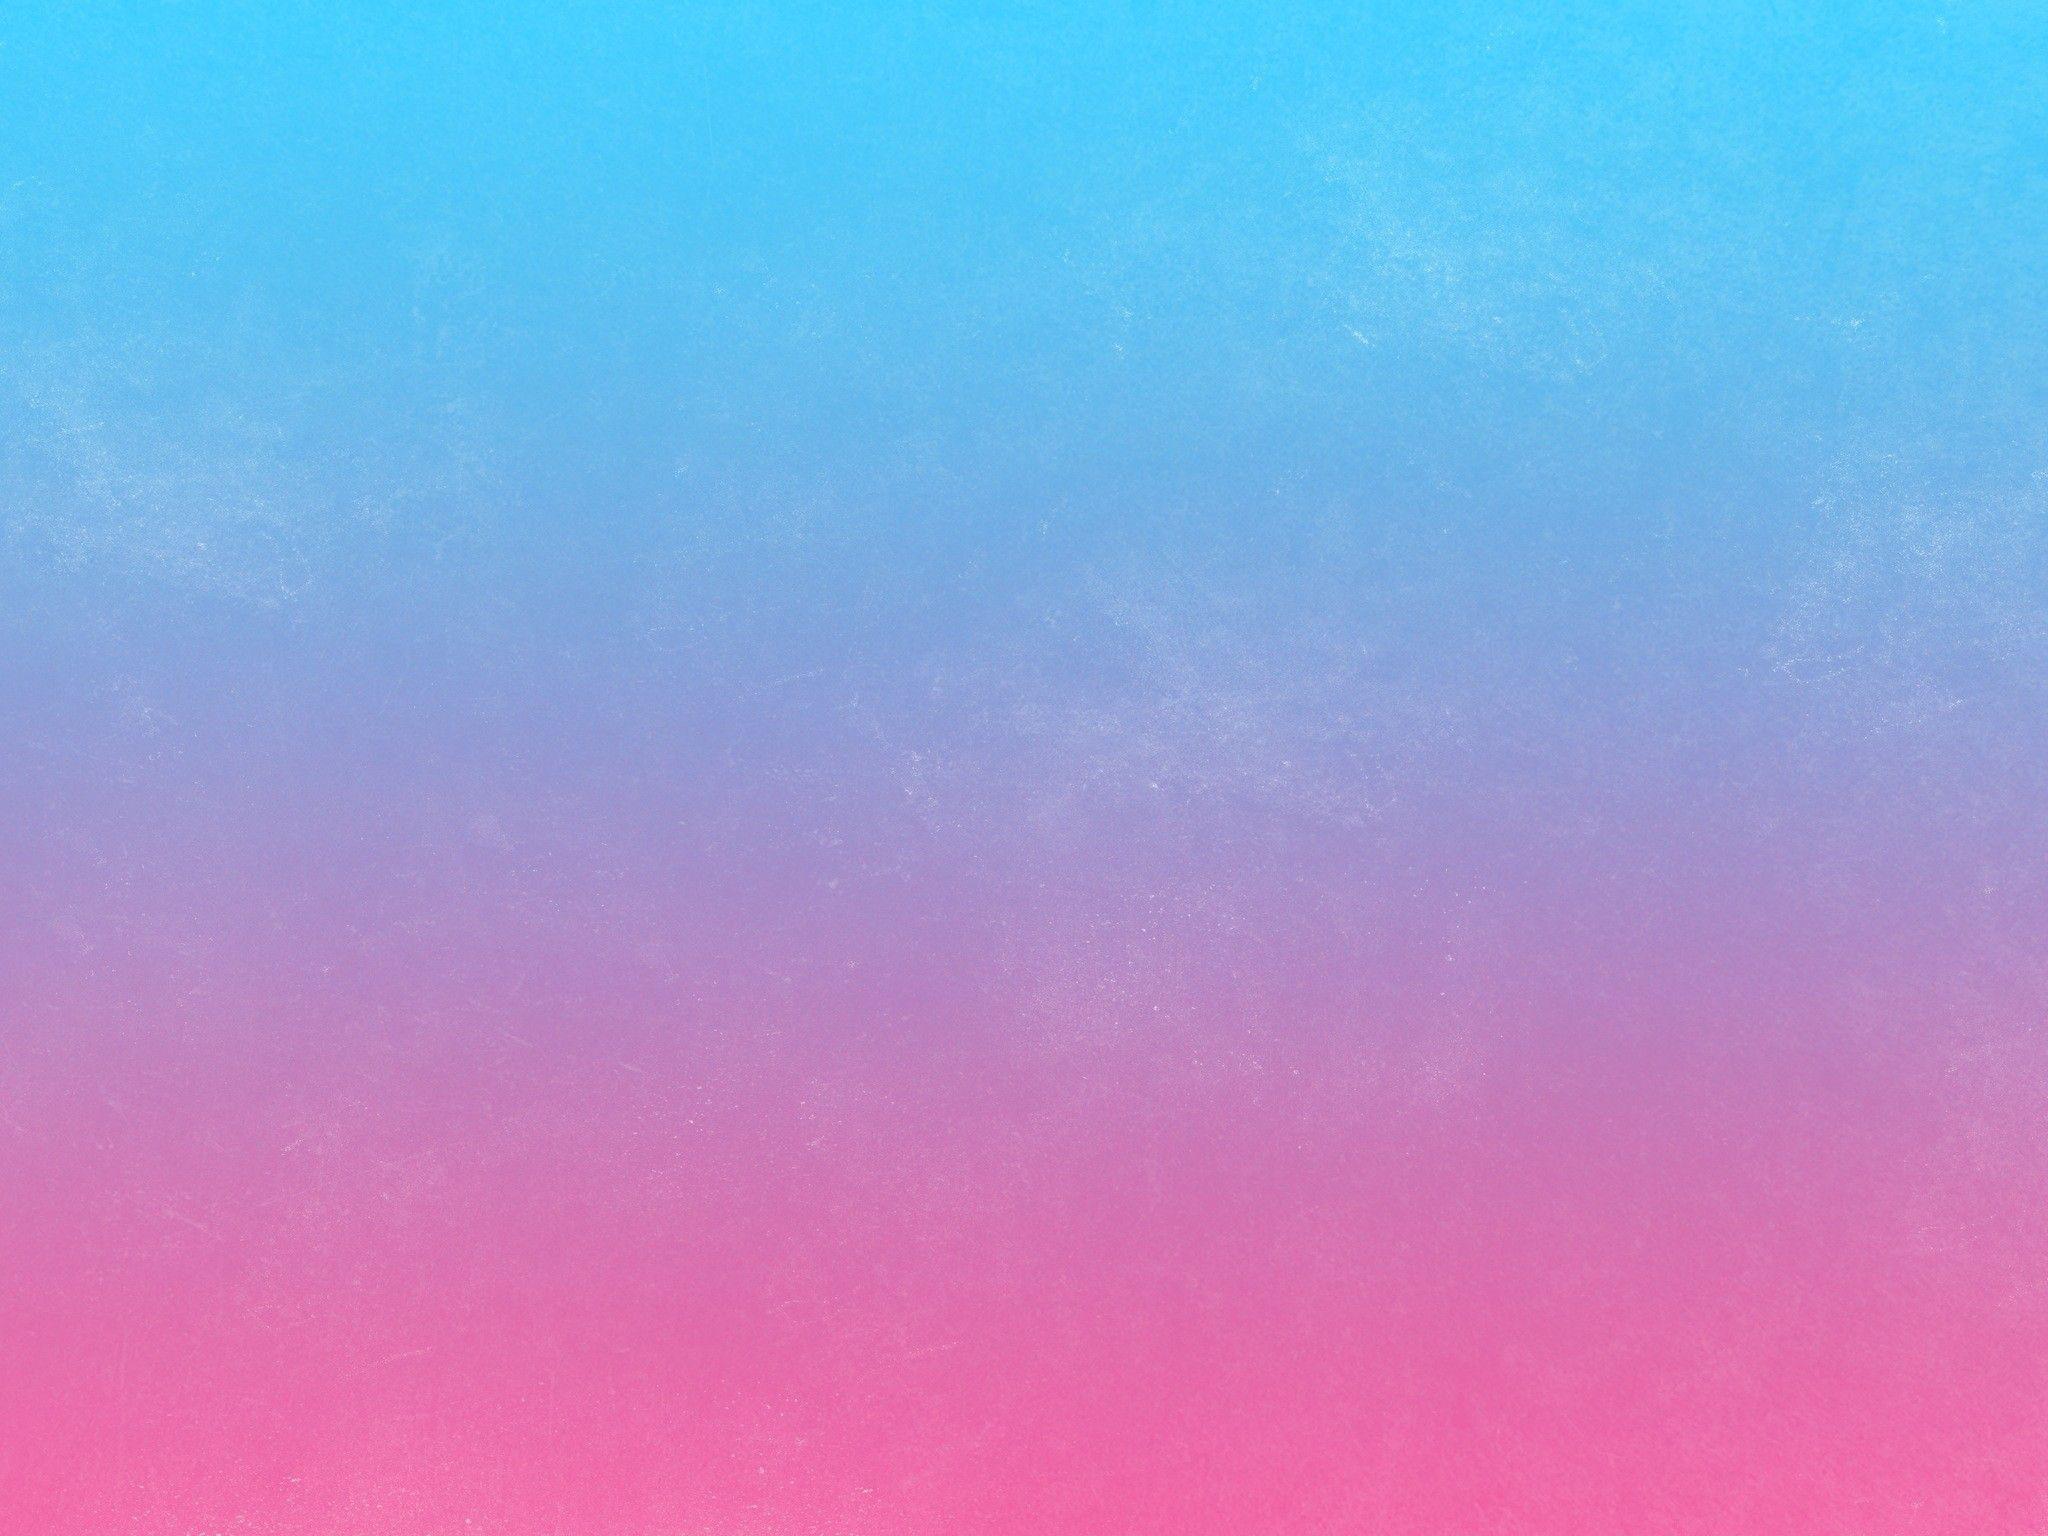 Blue and Pink Wallpaper